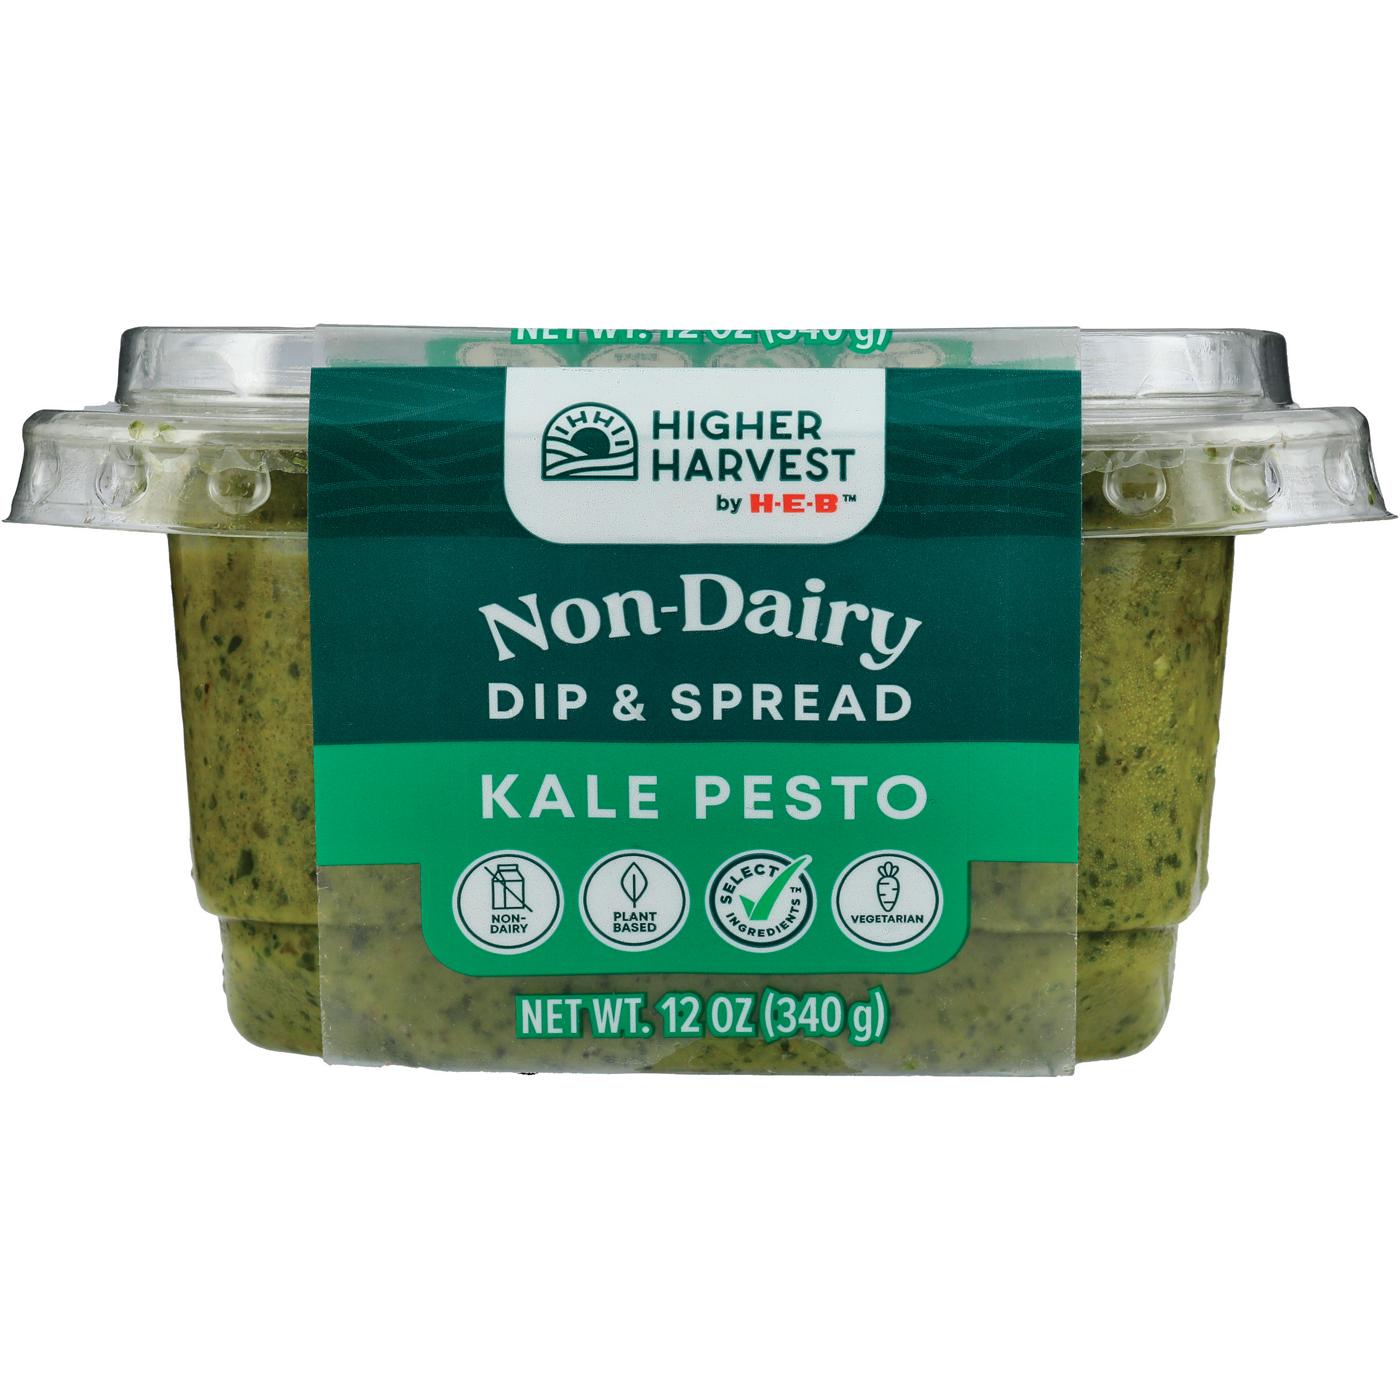 Higher Harvest by H-E-B Non-Dairy Dip & Spread - Kale Pesto; image 1 of 3